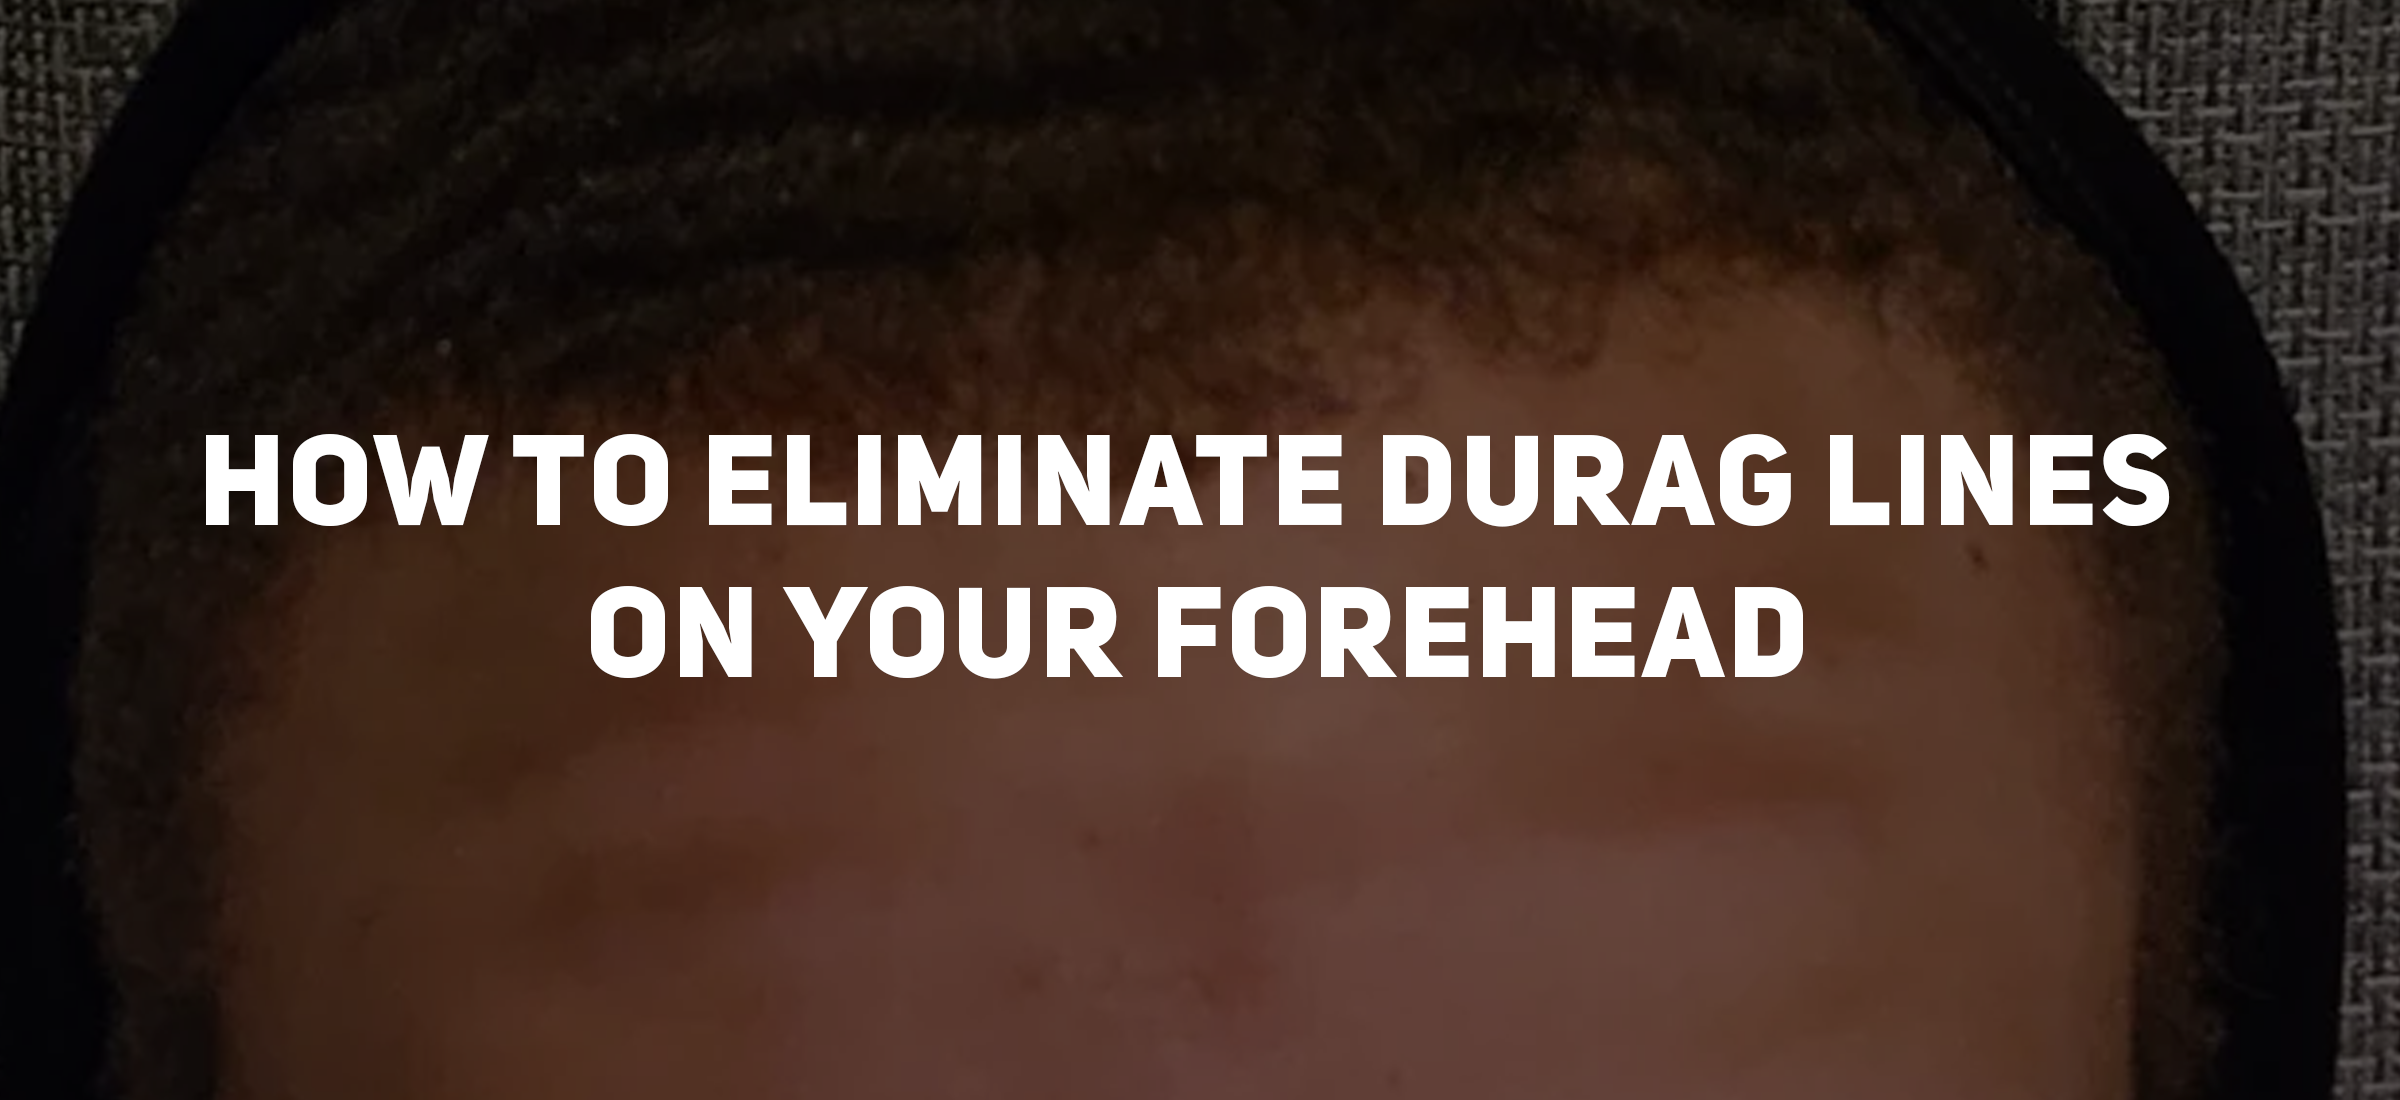 How to Eliminate Durag Lines on Your Forehead